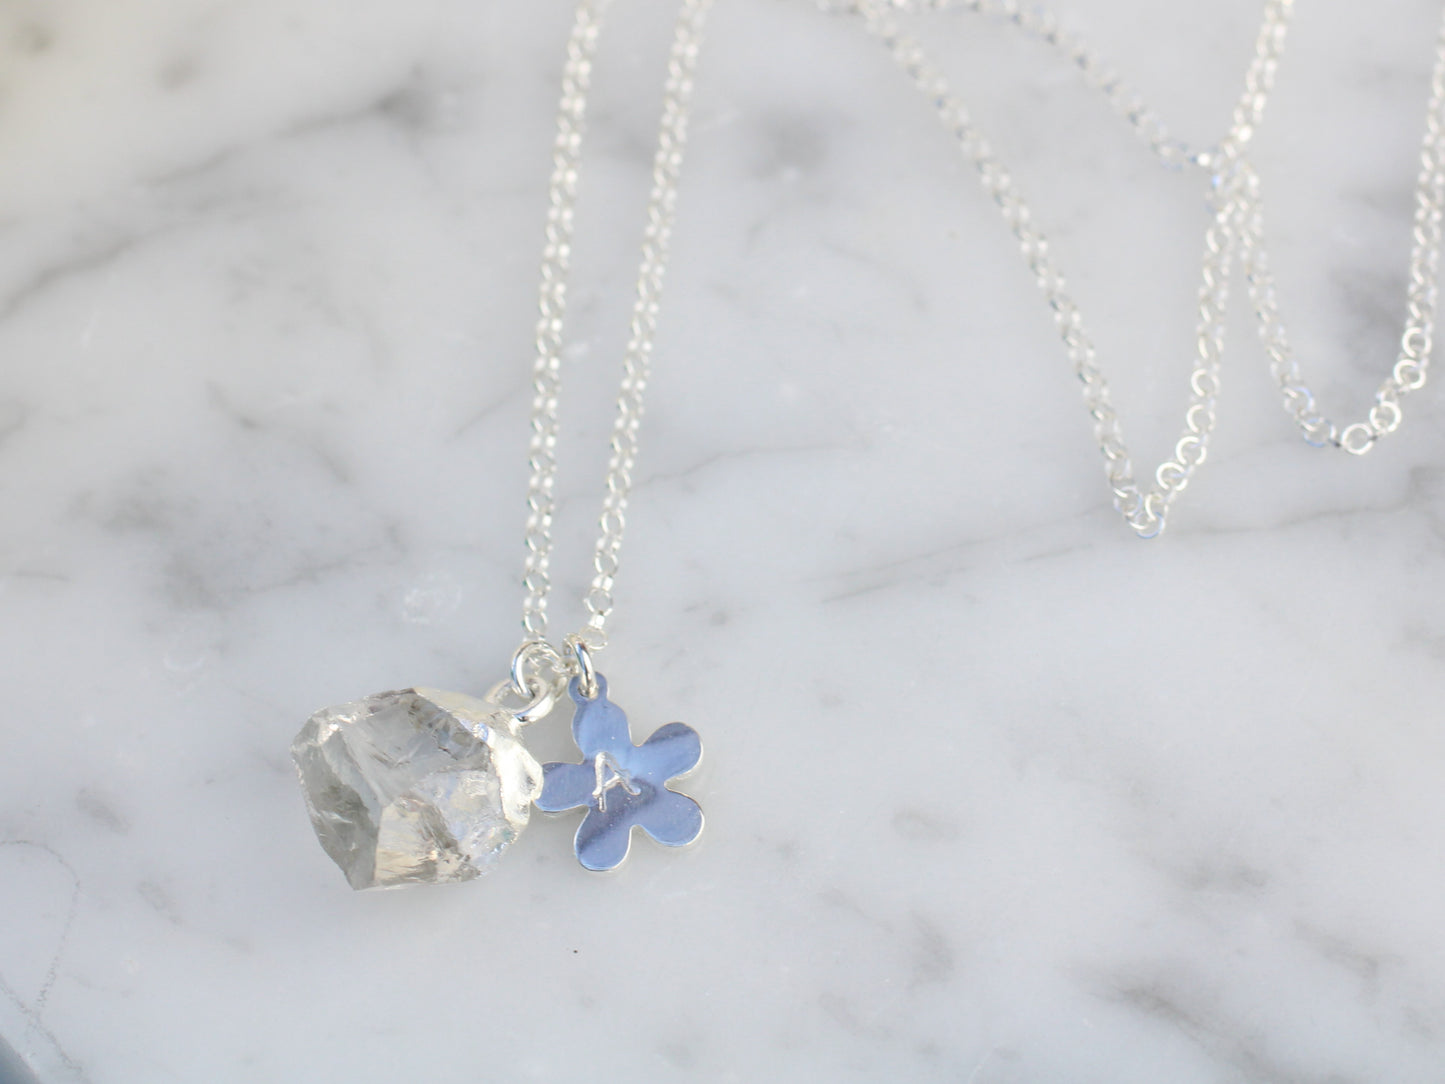 Personalised clear quartz necklace. April birthstone.